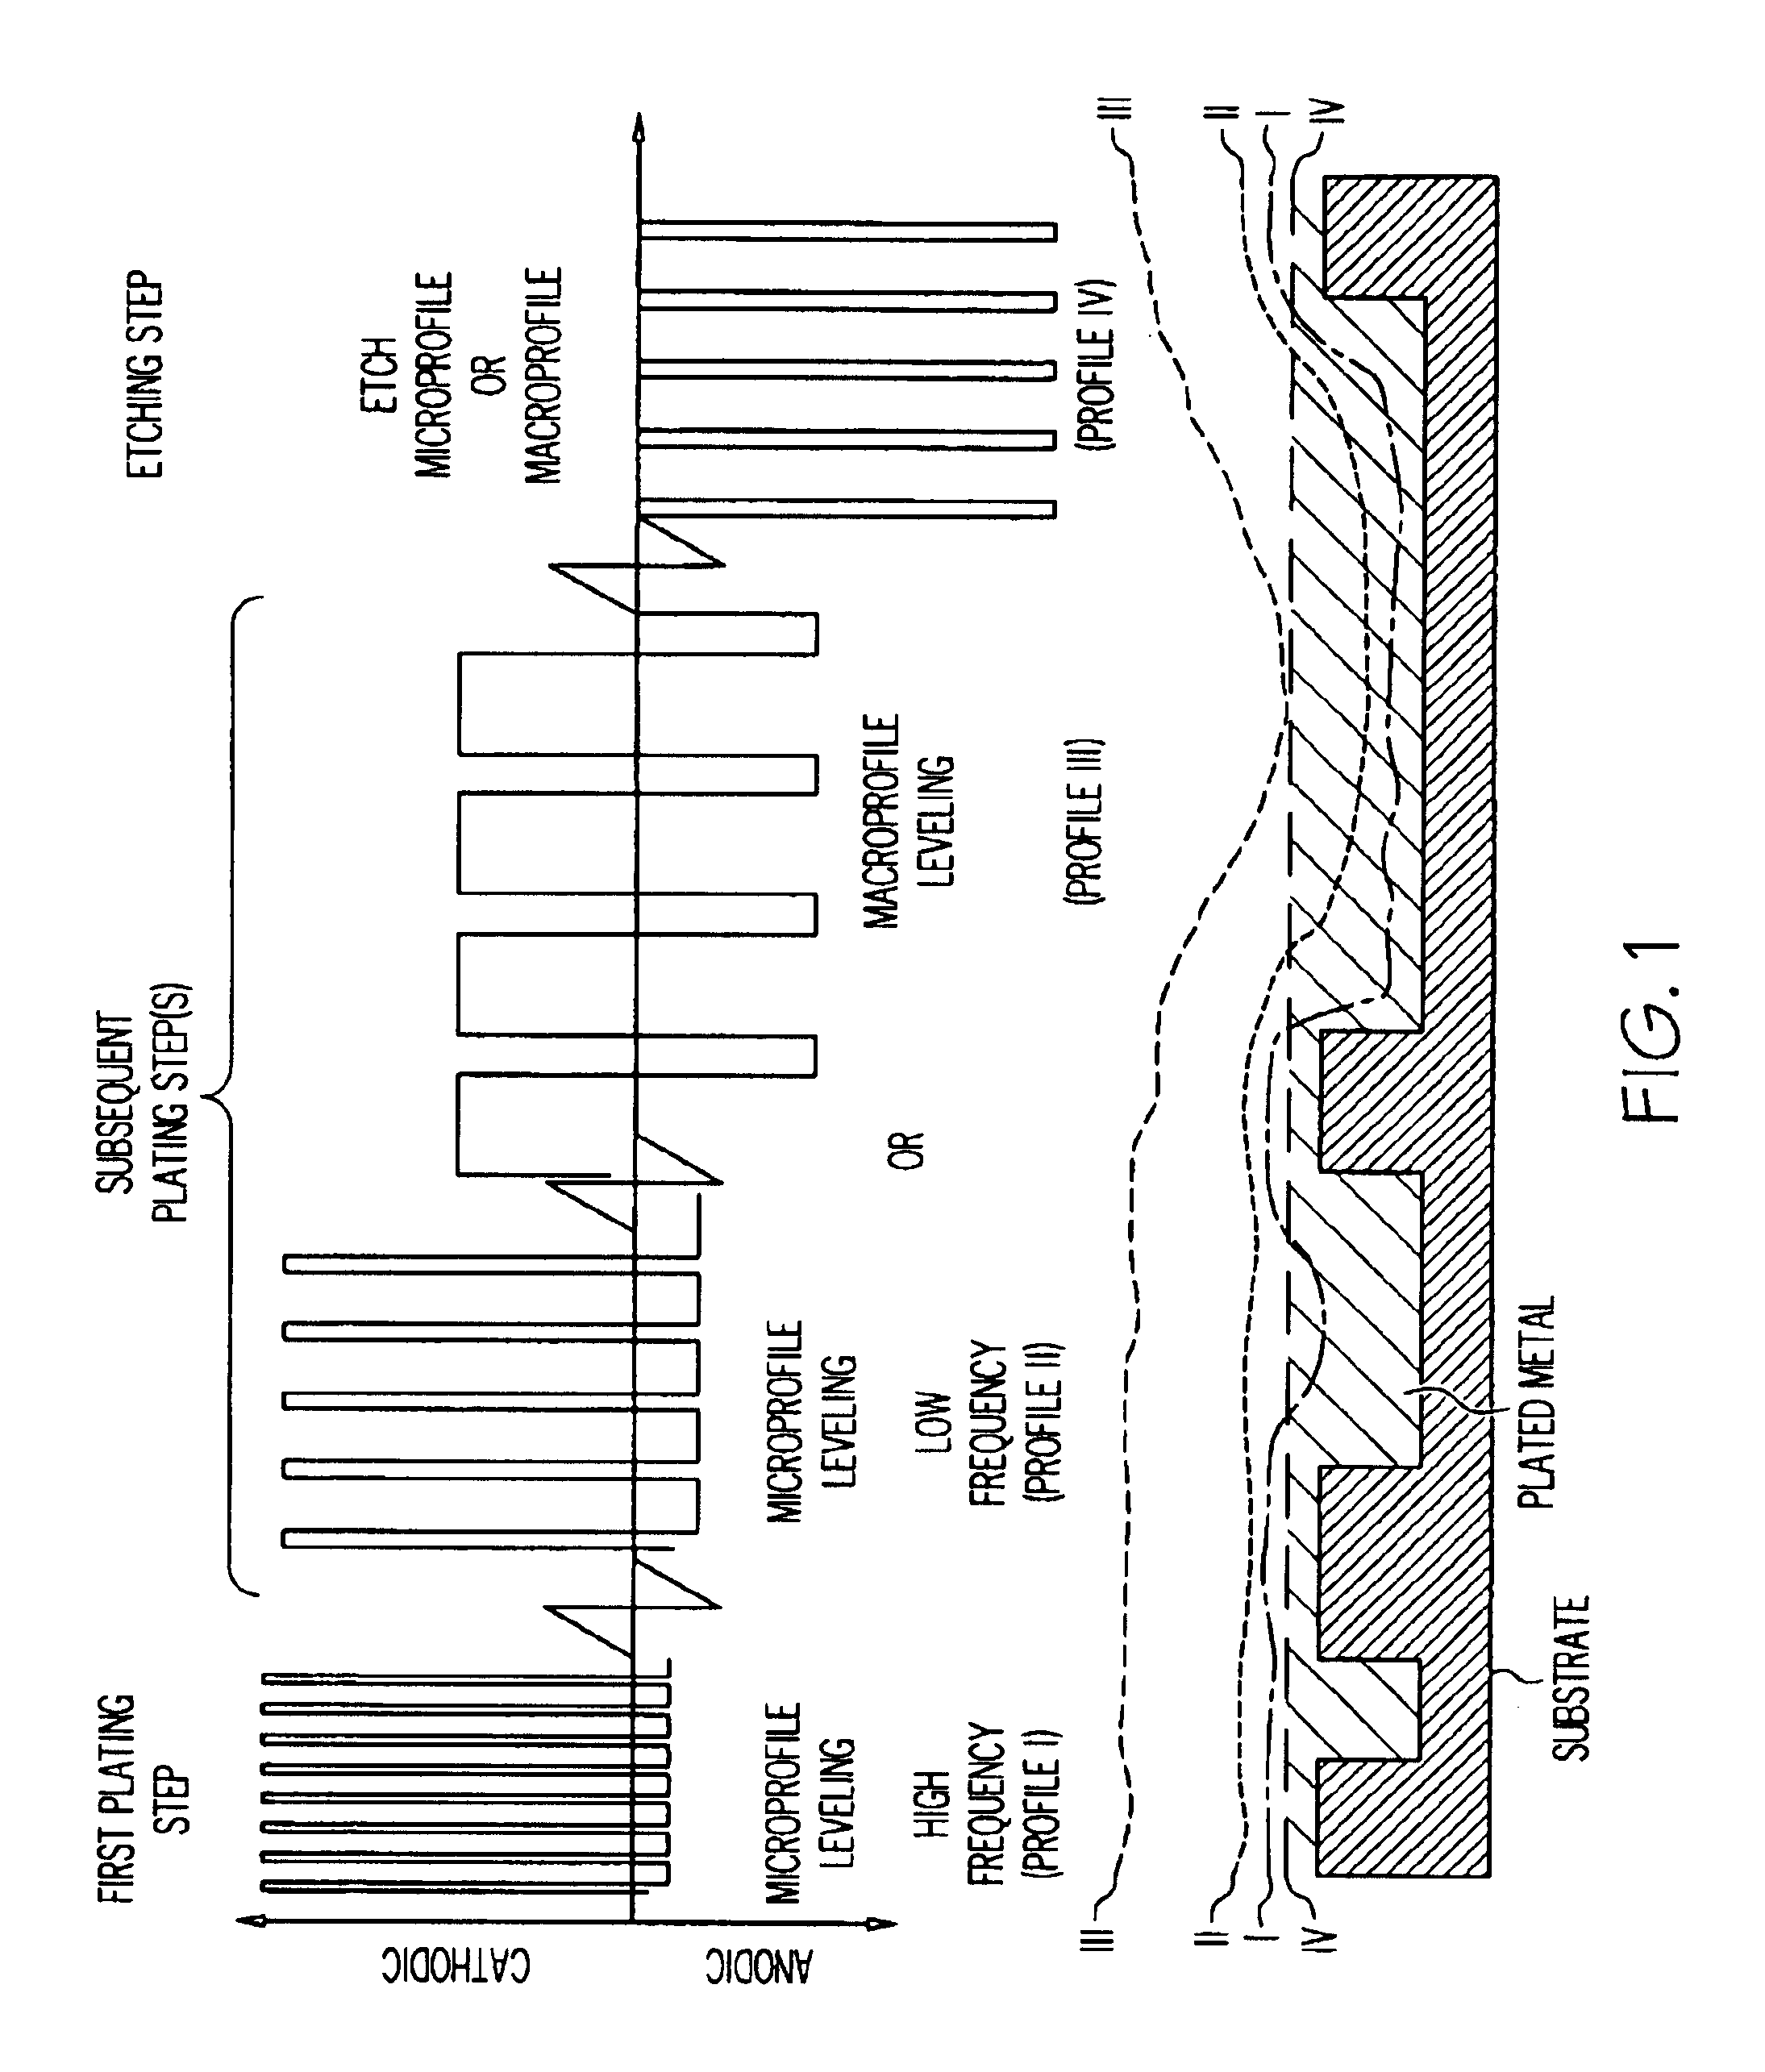 Method for electrochemical metallization and planarization of semiconductor substrates having features of different sizes